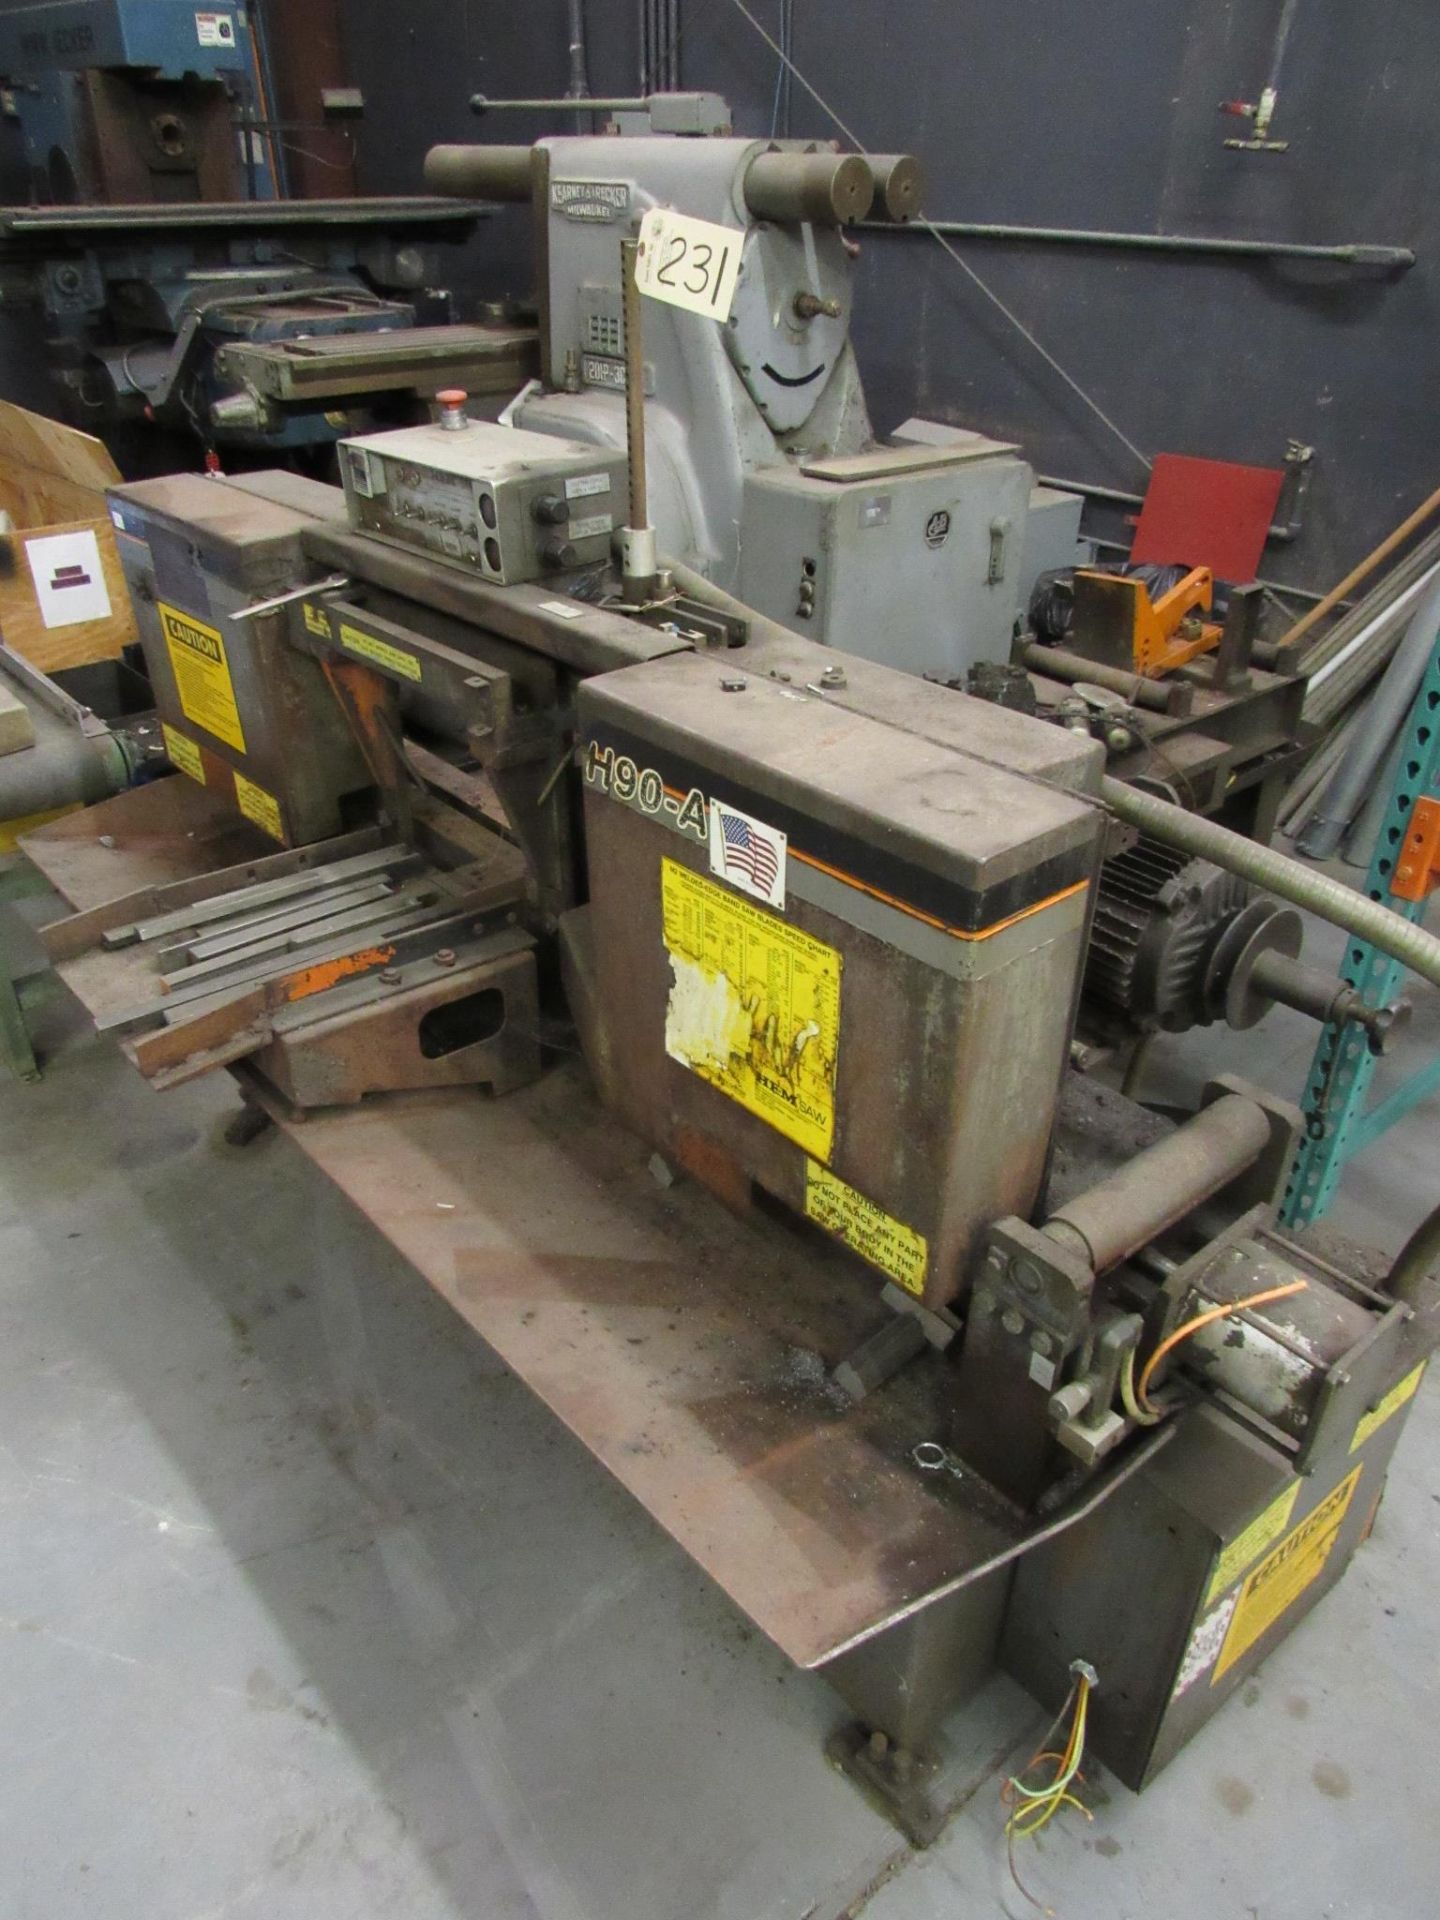 Hem H90-A Bandsaw, sn:746900 (non-running) **located - 4225 Highway 90 East, Broussard, LA 70518** - Image 2 of 4